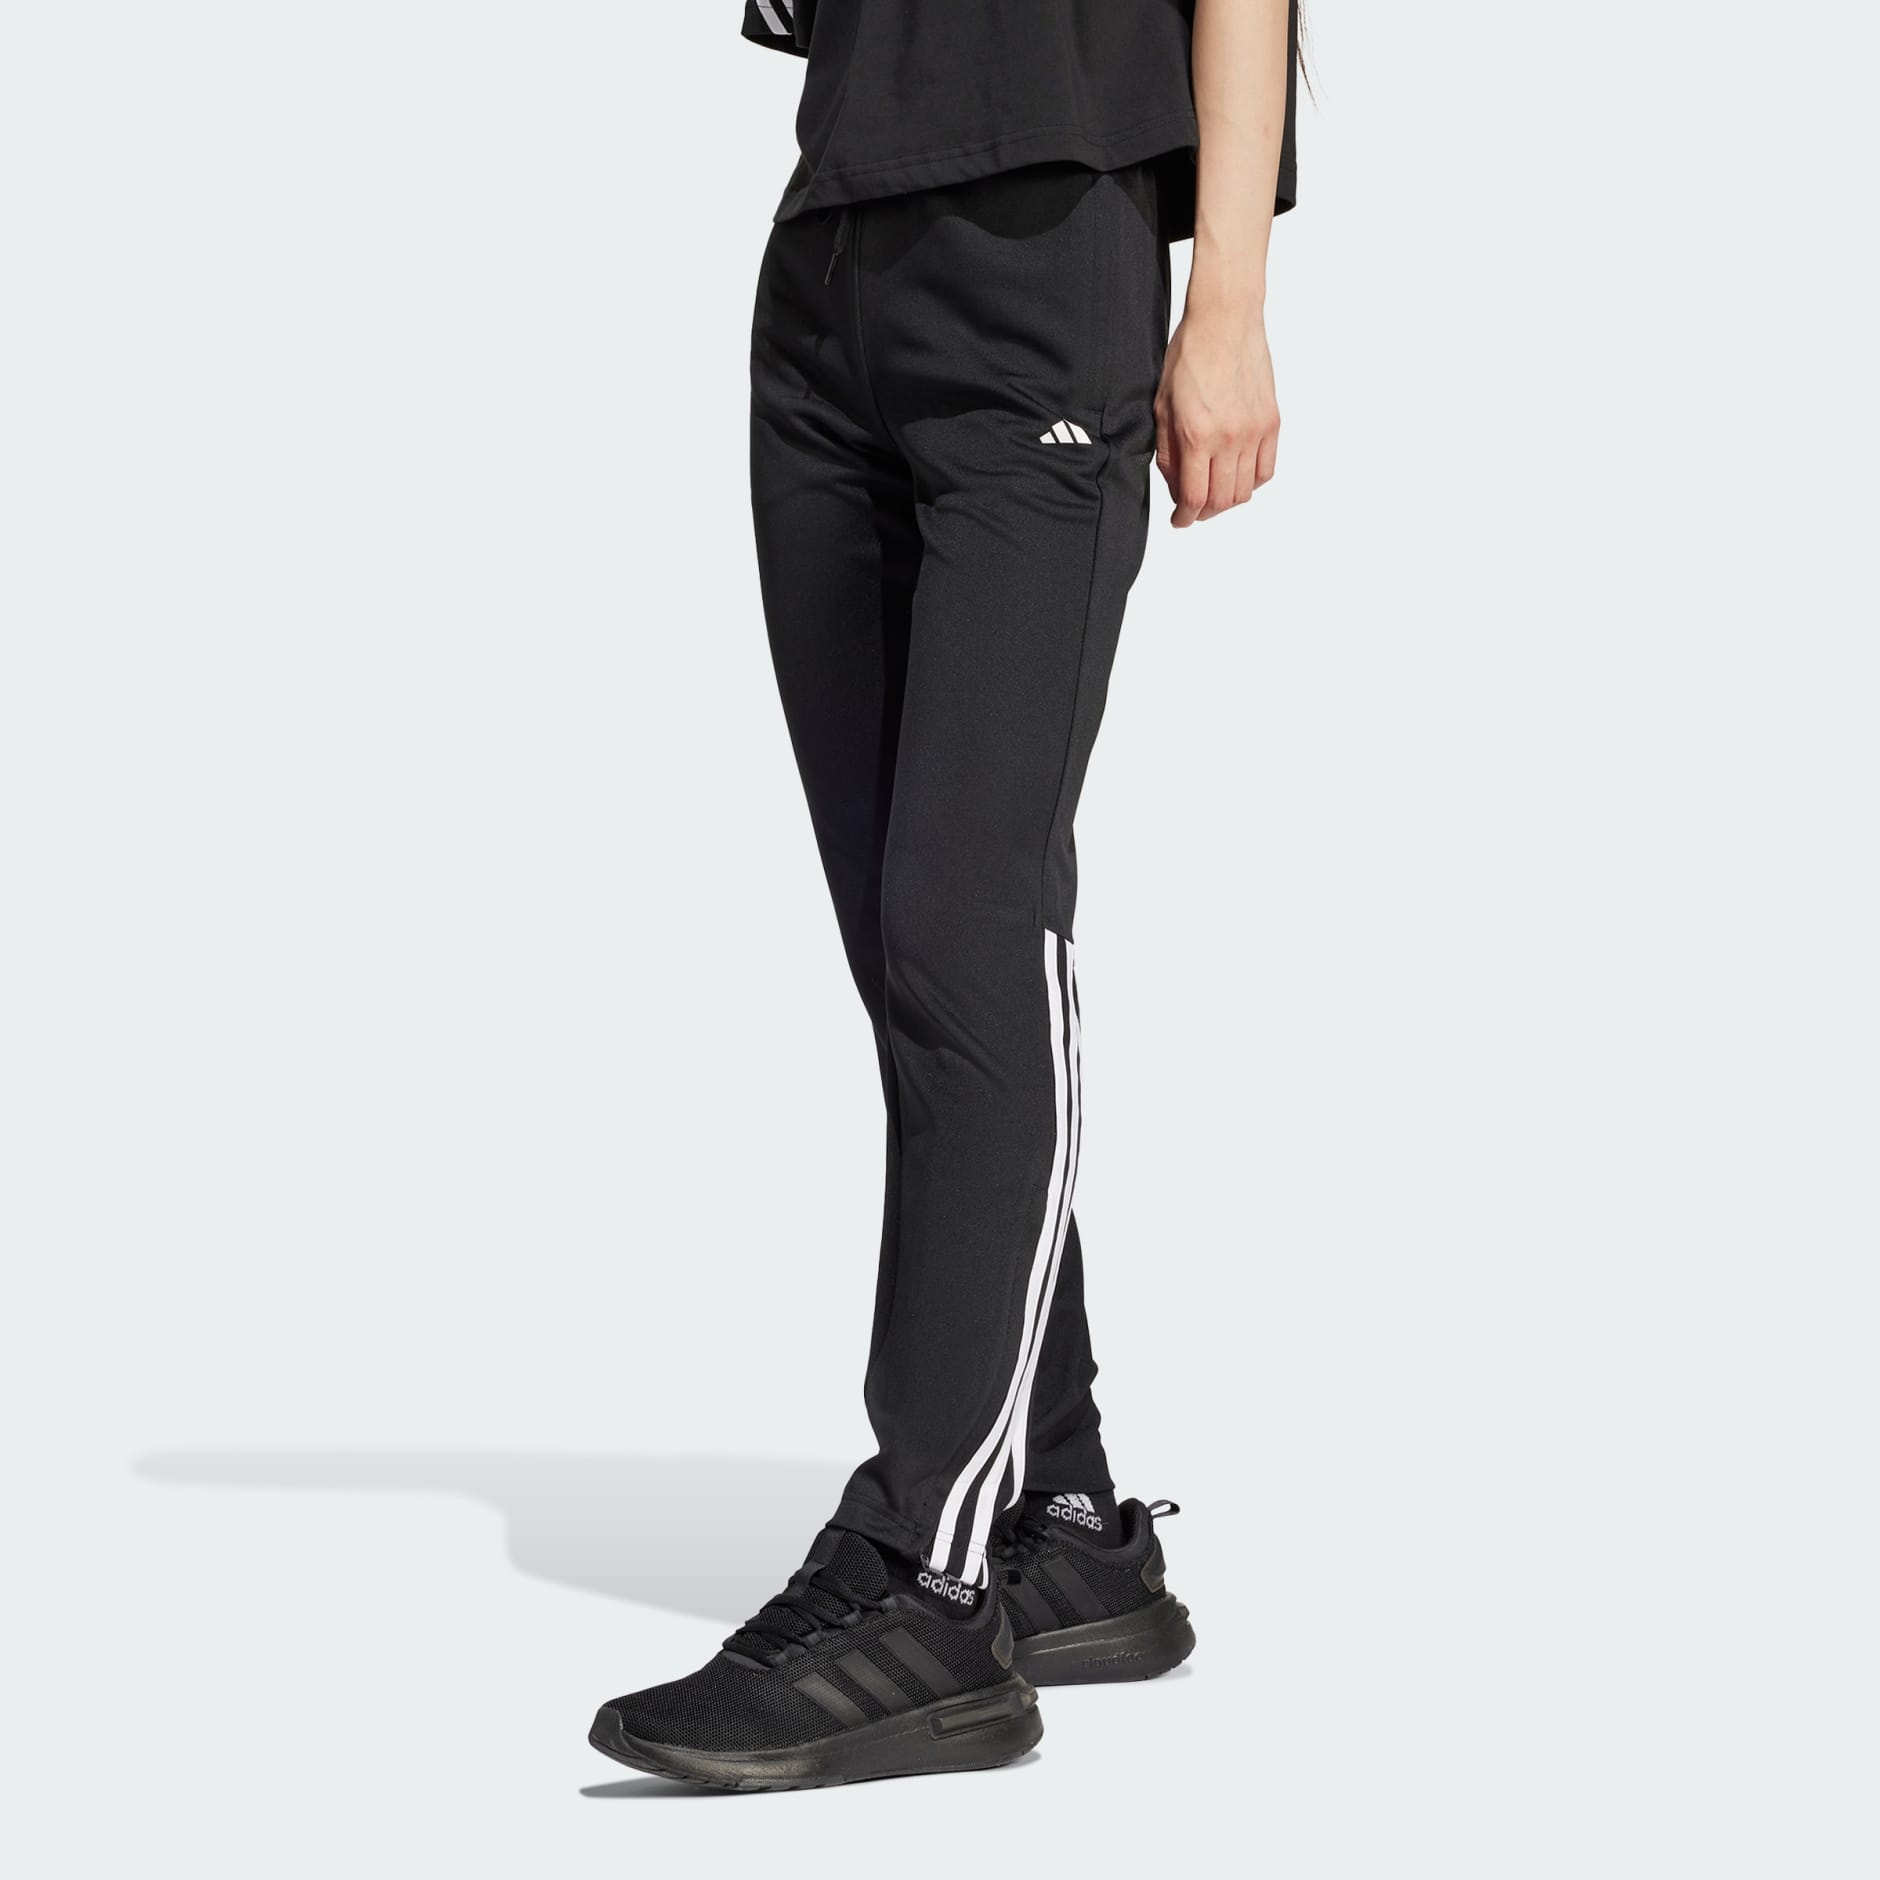 How To Make Adidas & Track Pants Into Tapered Skinny Leggings 